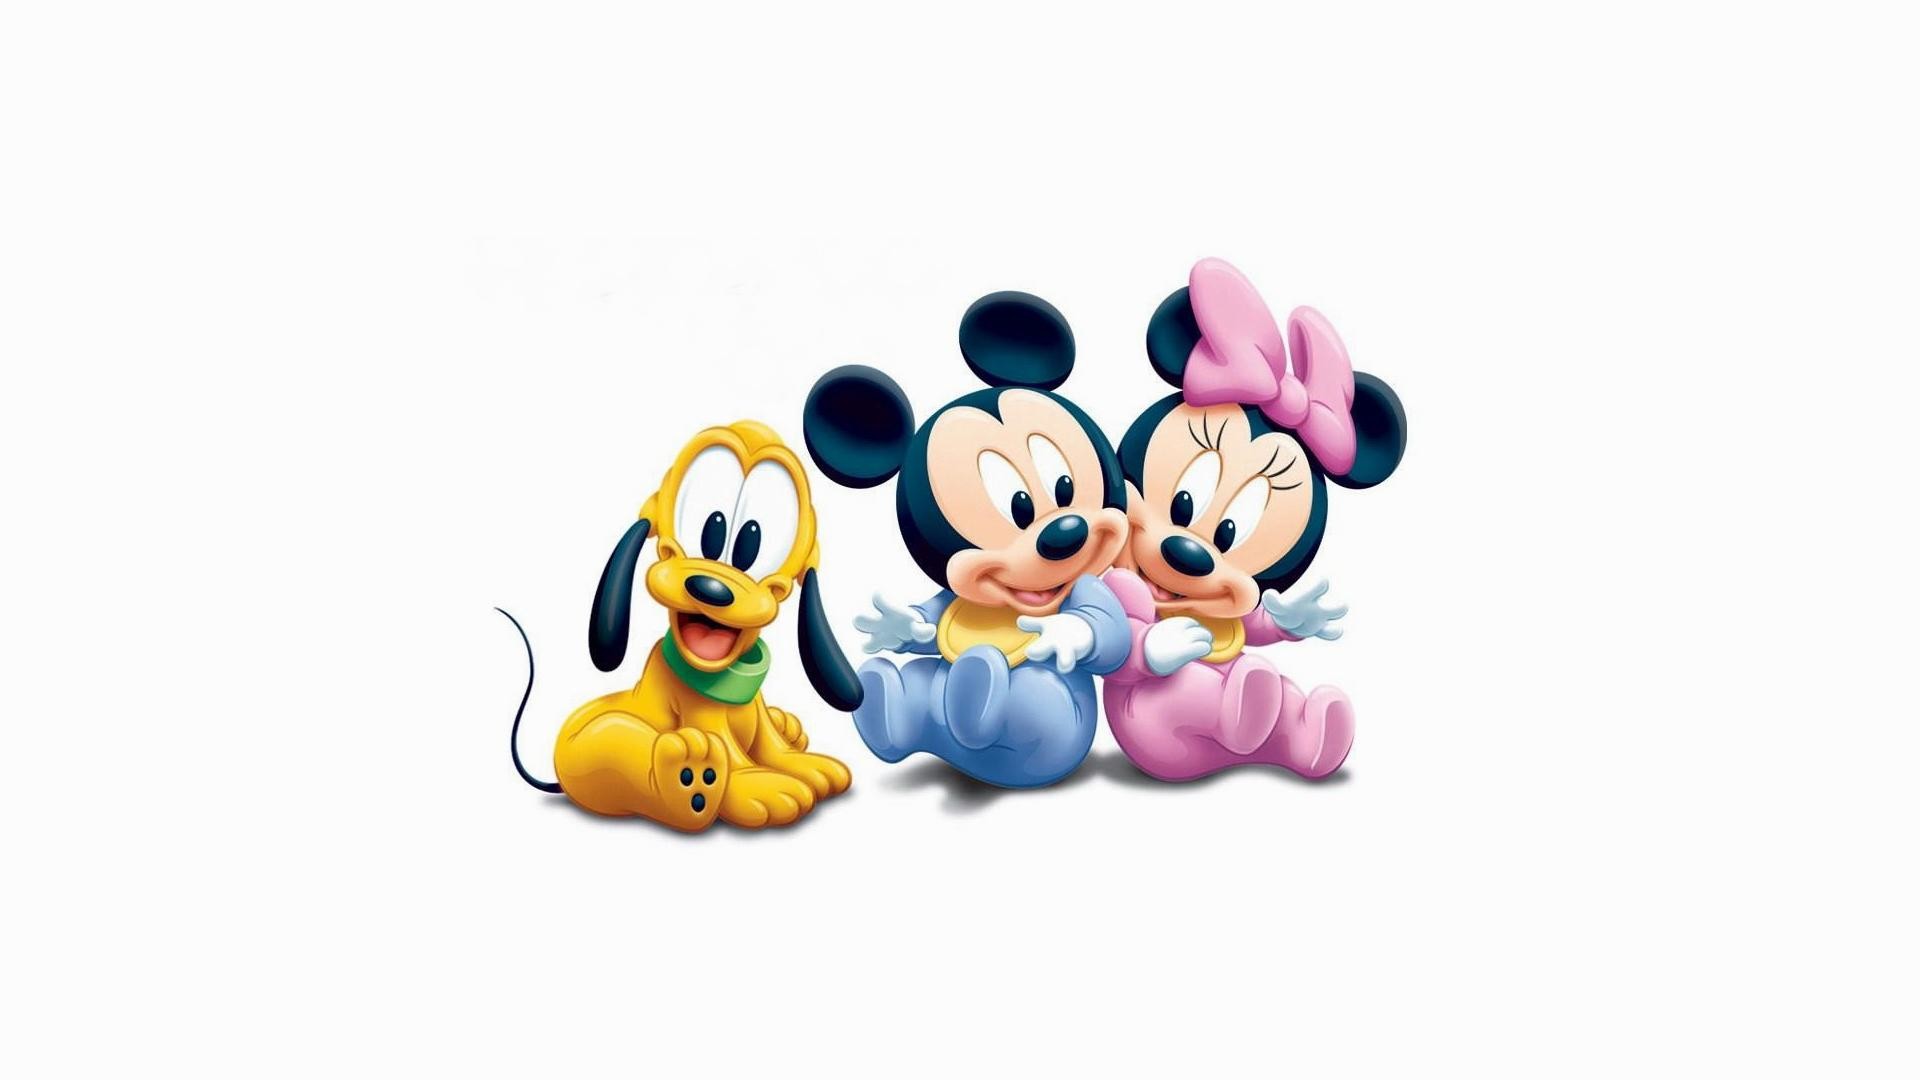 1920x1080 Disney-cartoon-baby-mickey-and-minnie-mouse-wallpaper-